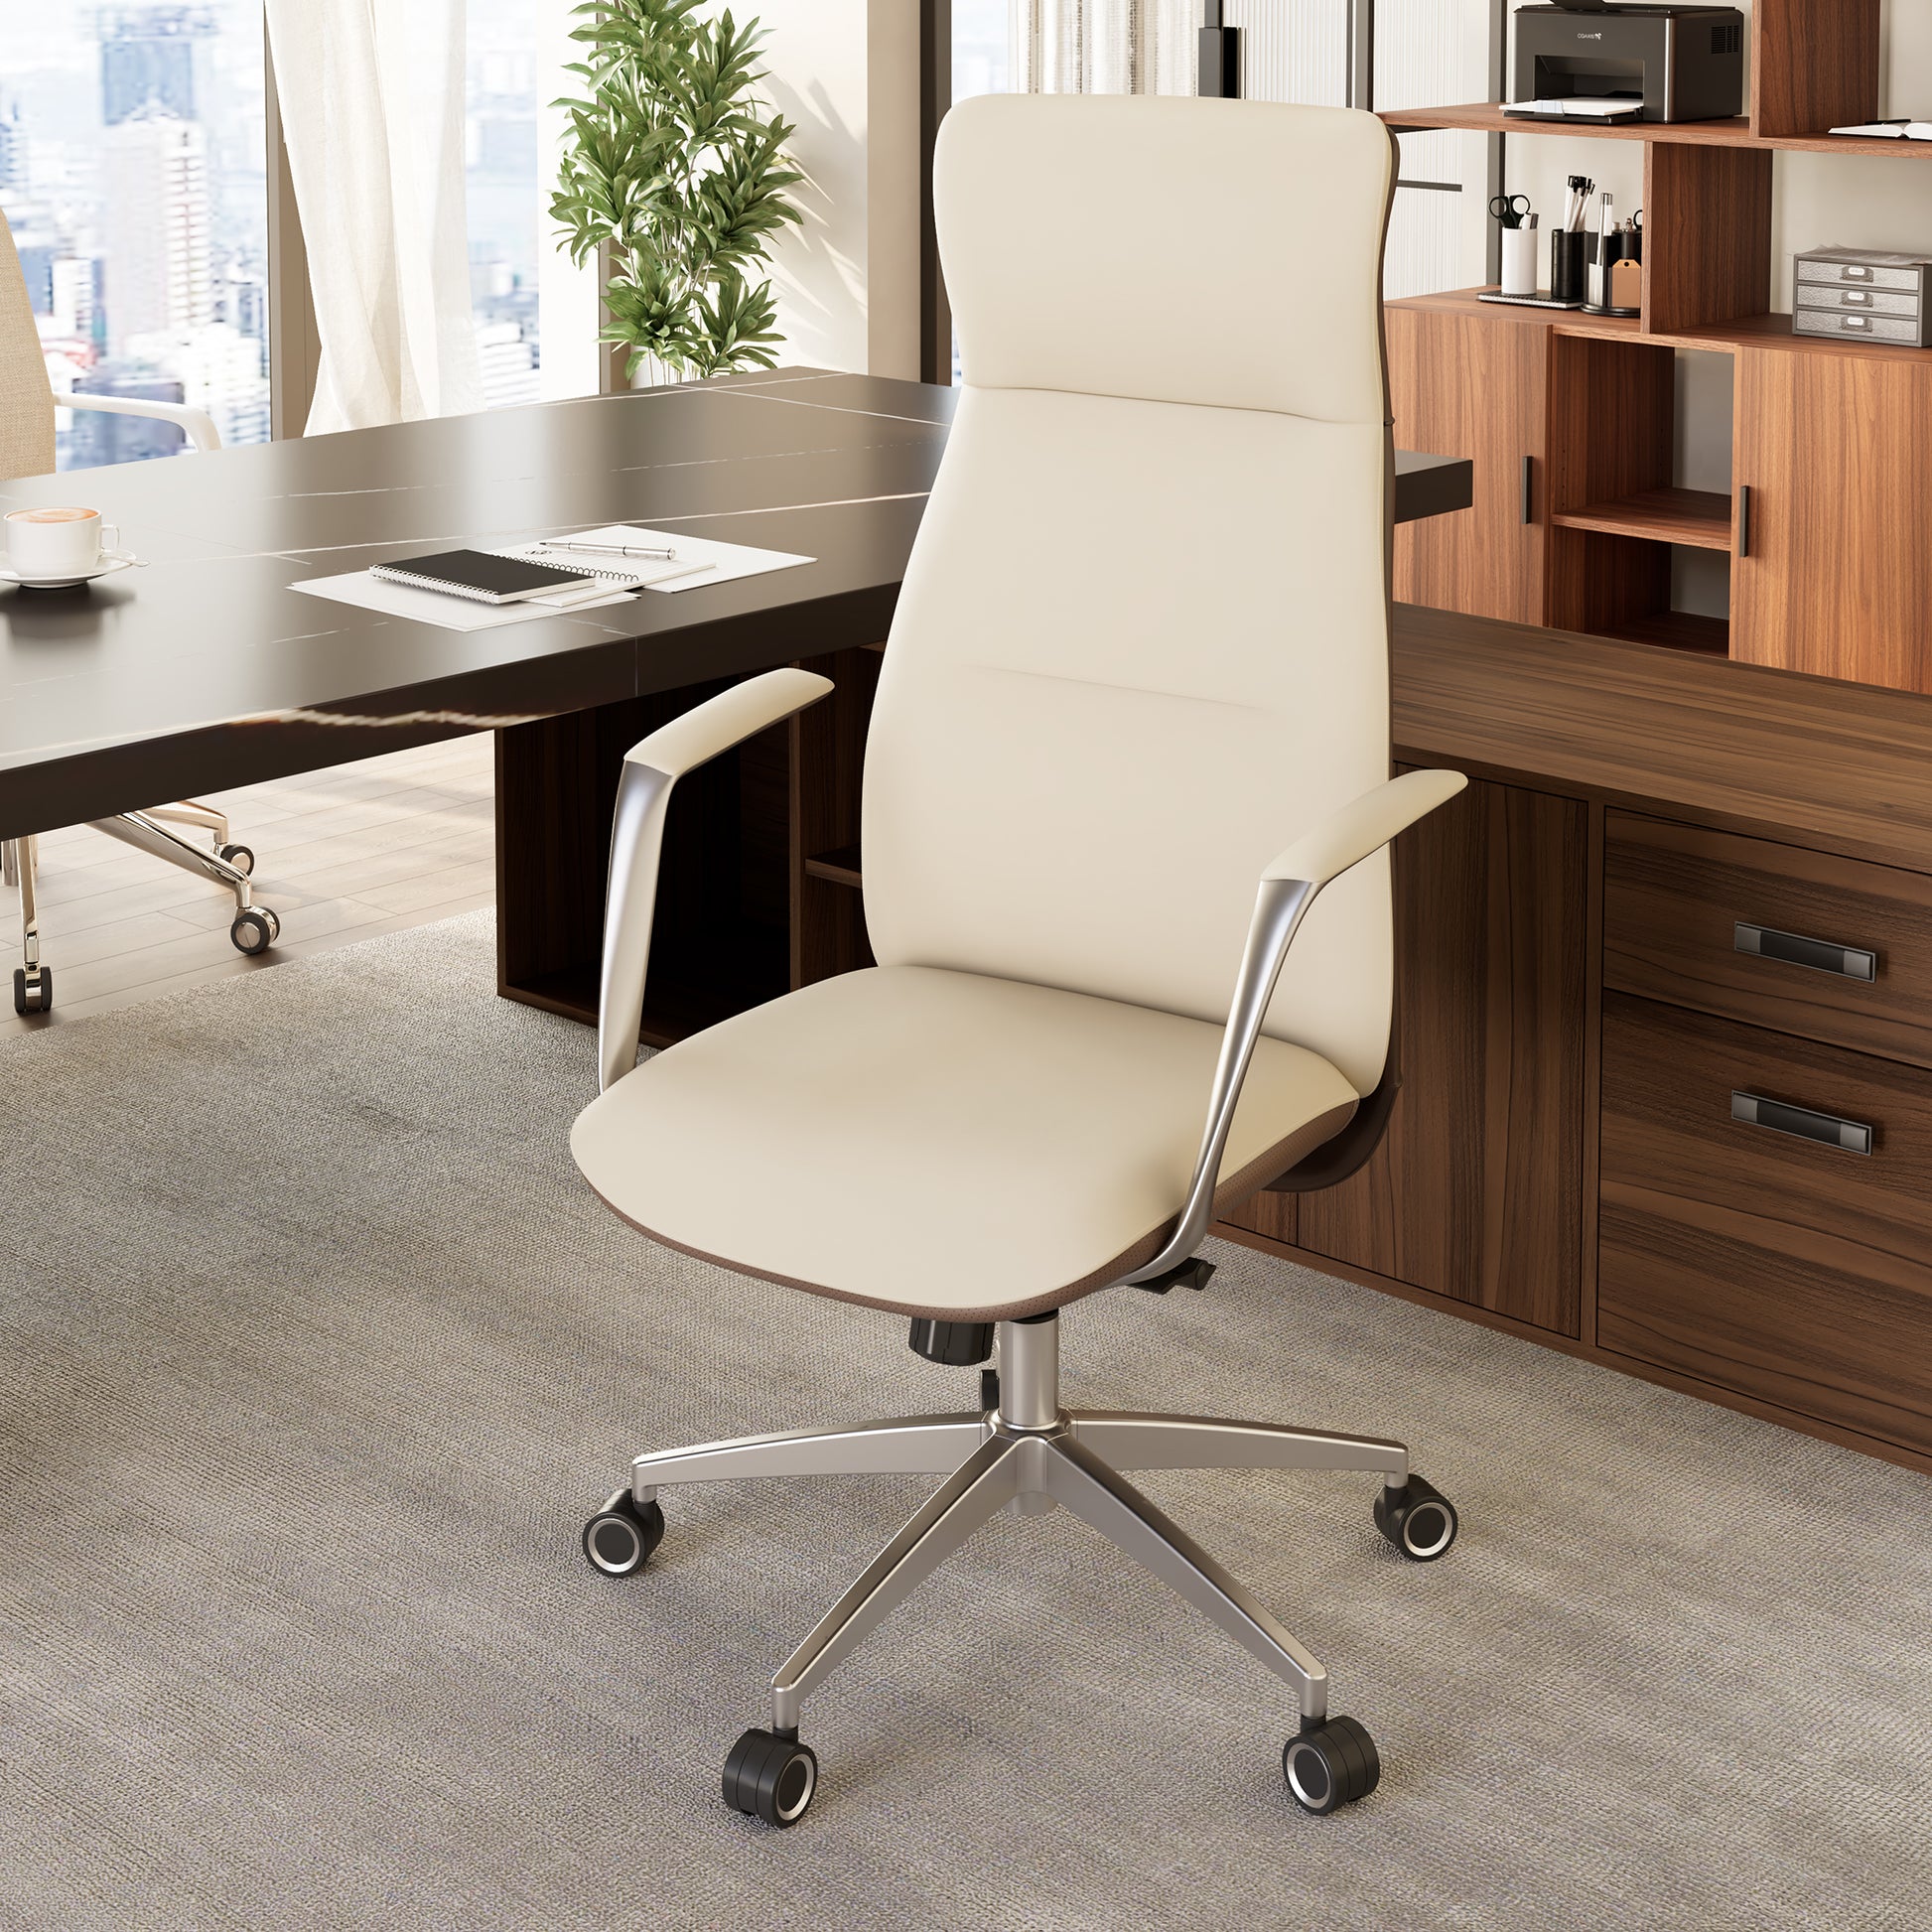 Royal Slim OC08 Leather High Back Executive Office Chair, Beige White in High End Office 